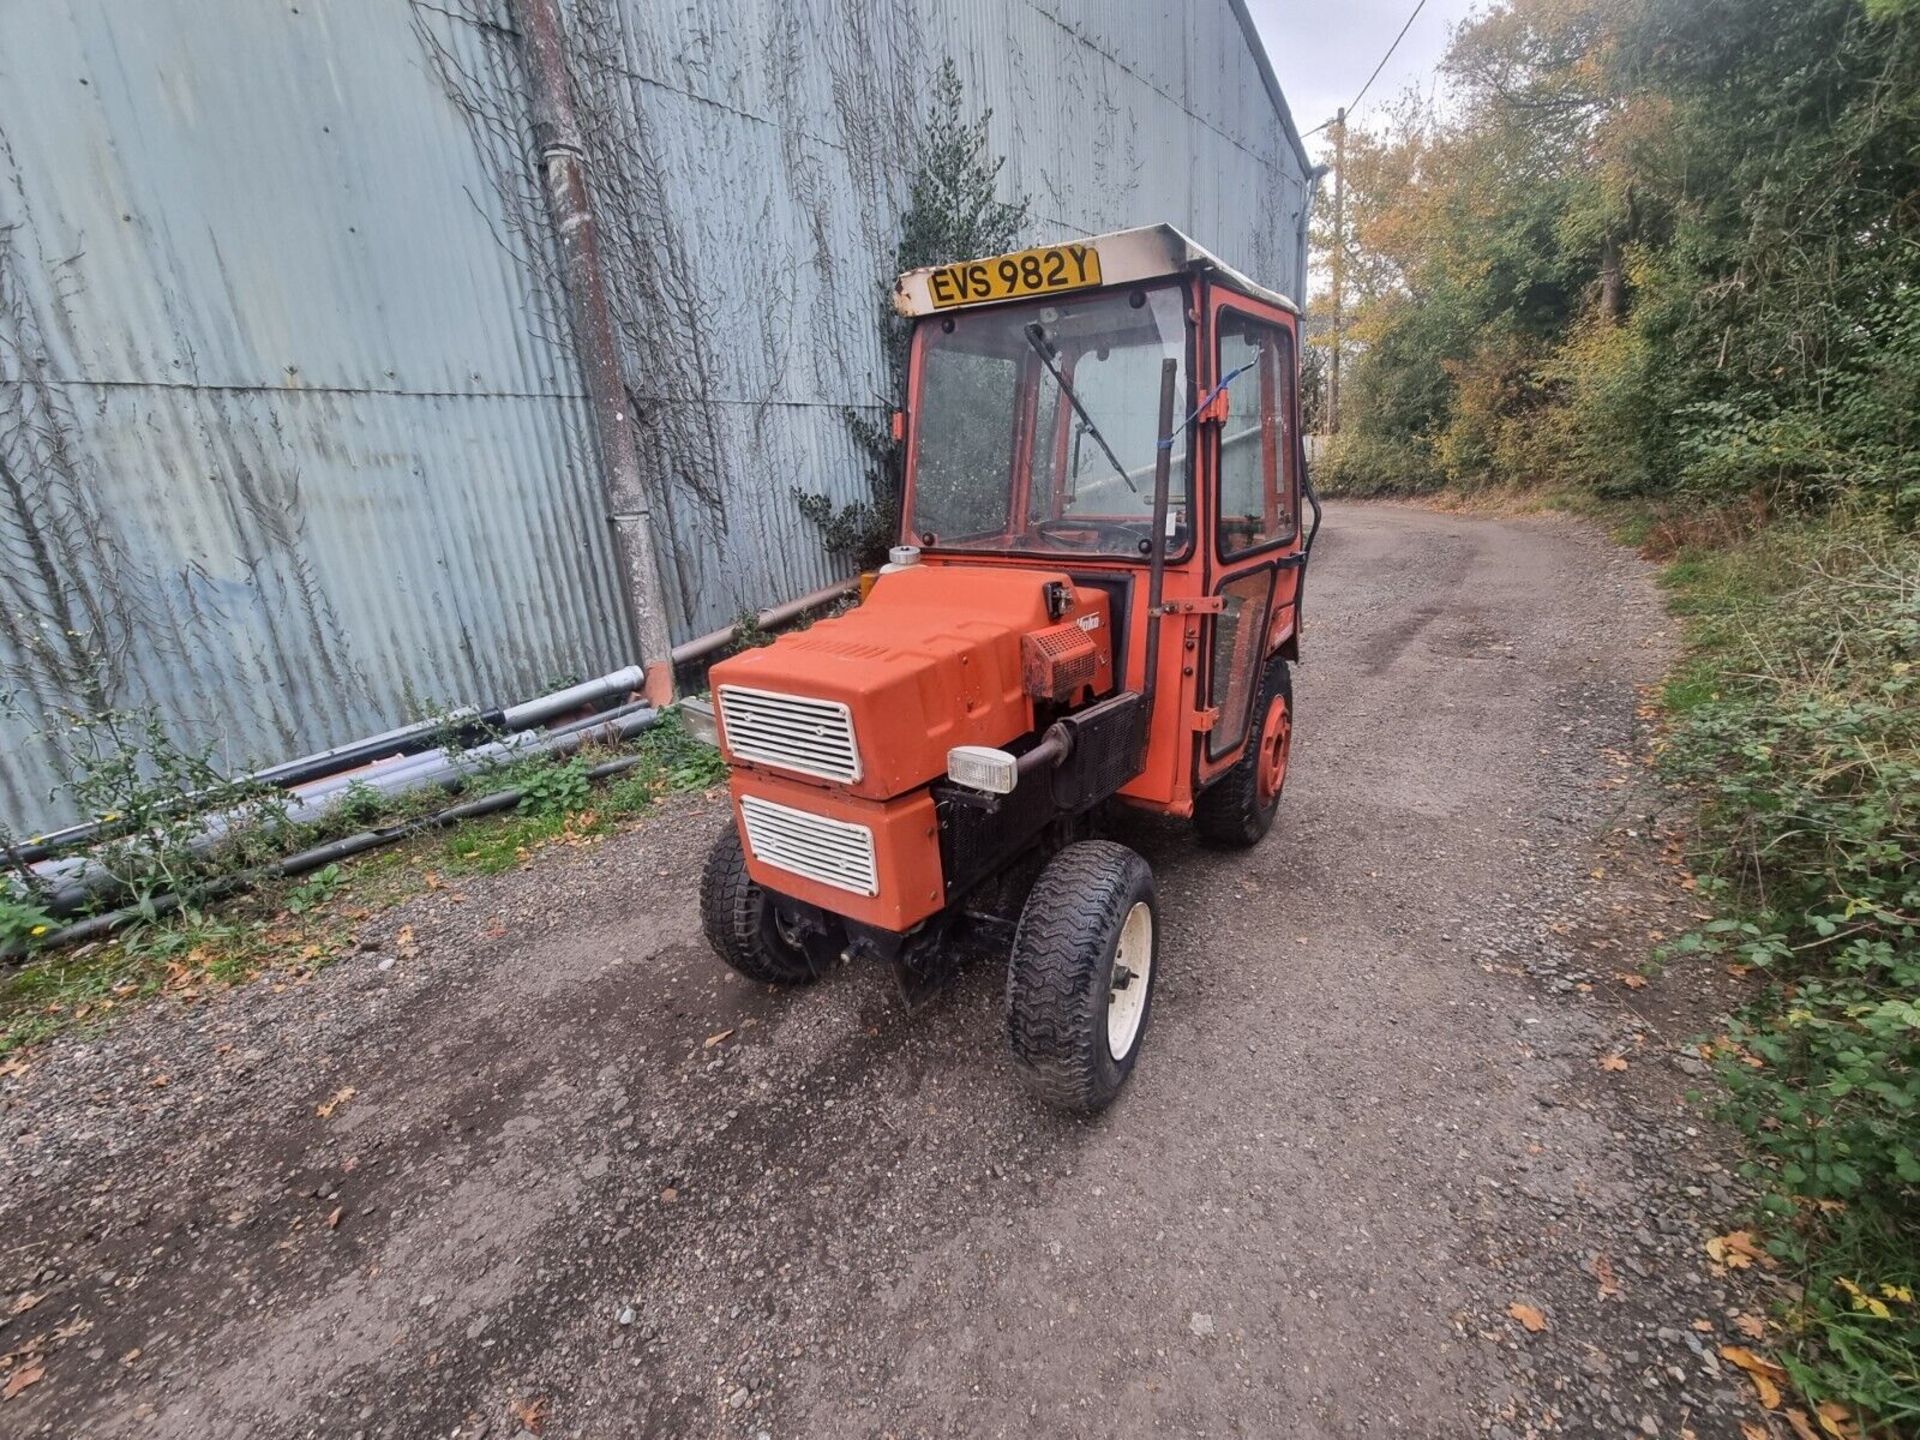 1987 HAKO TRACTOR 2WD - Image 3 of 6